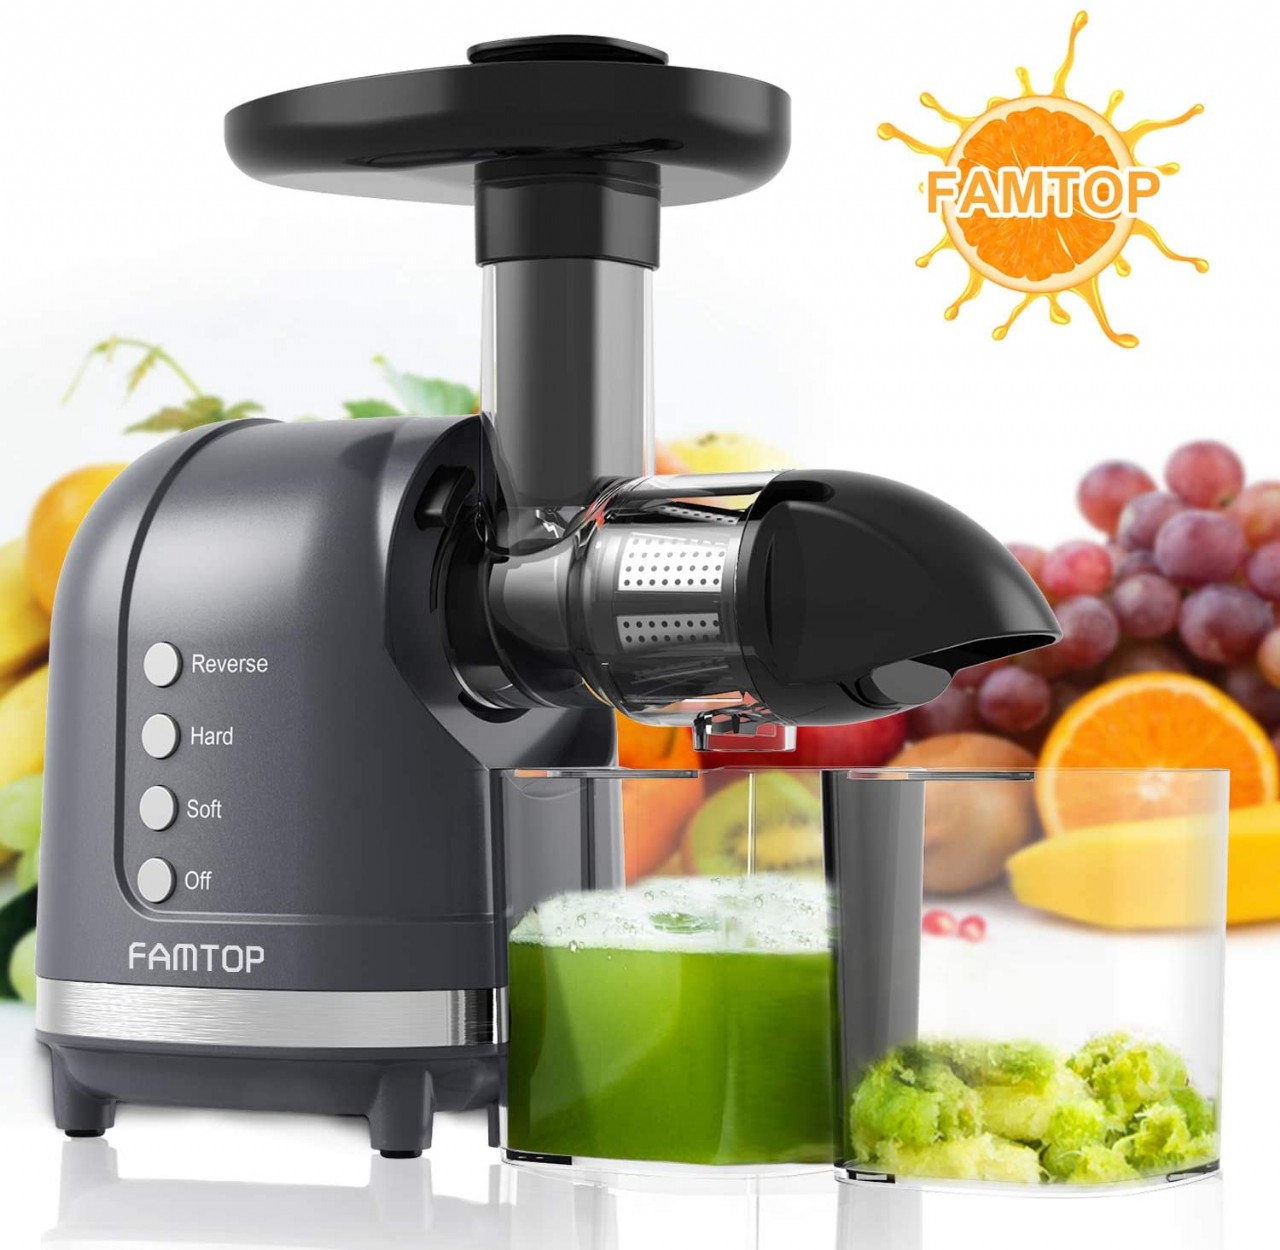 FAMTOP Slow Masticating Juicer Extractor with Reverse Function Quiet Motor Cold Press Machine Higher